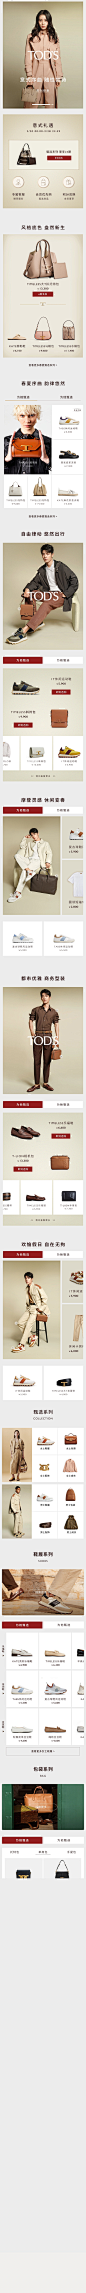 Tods_1677014242